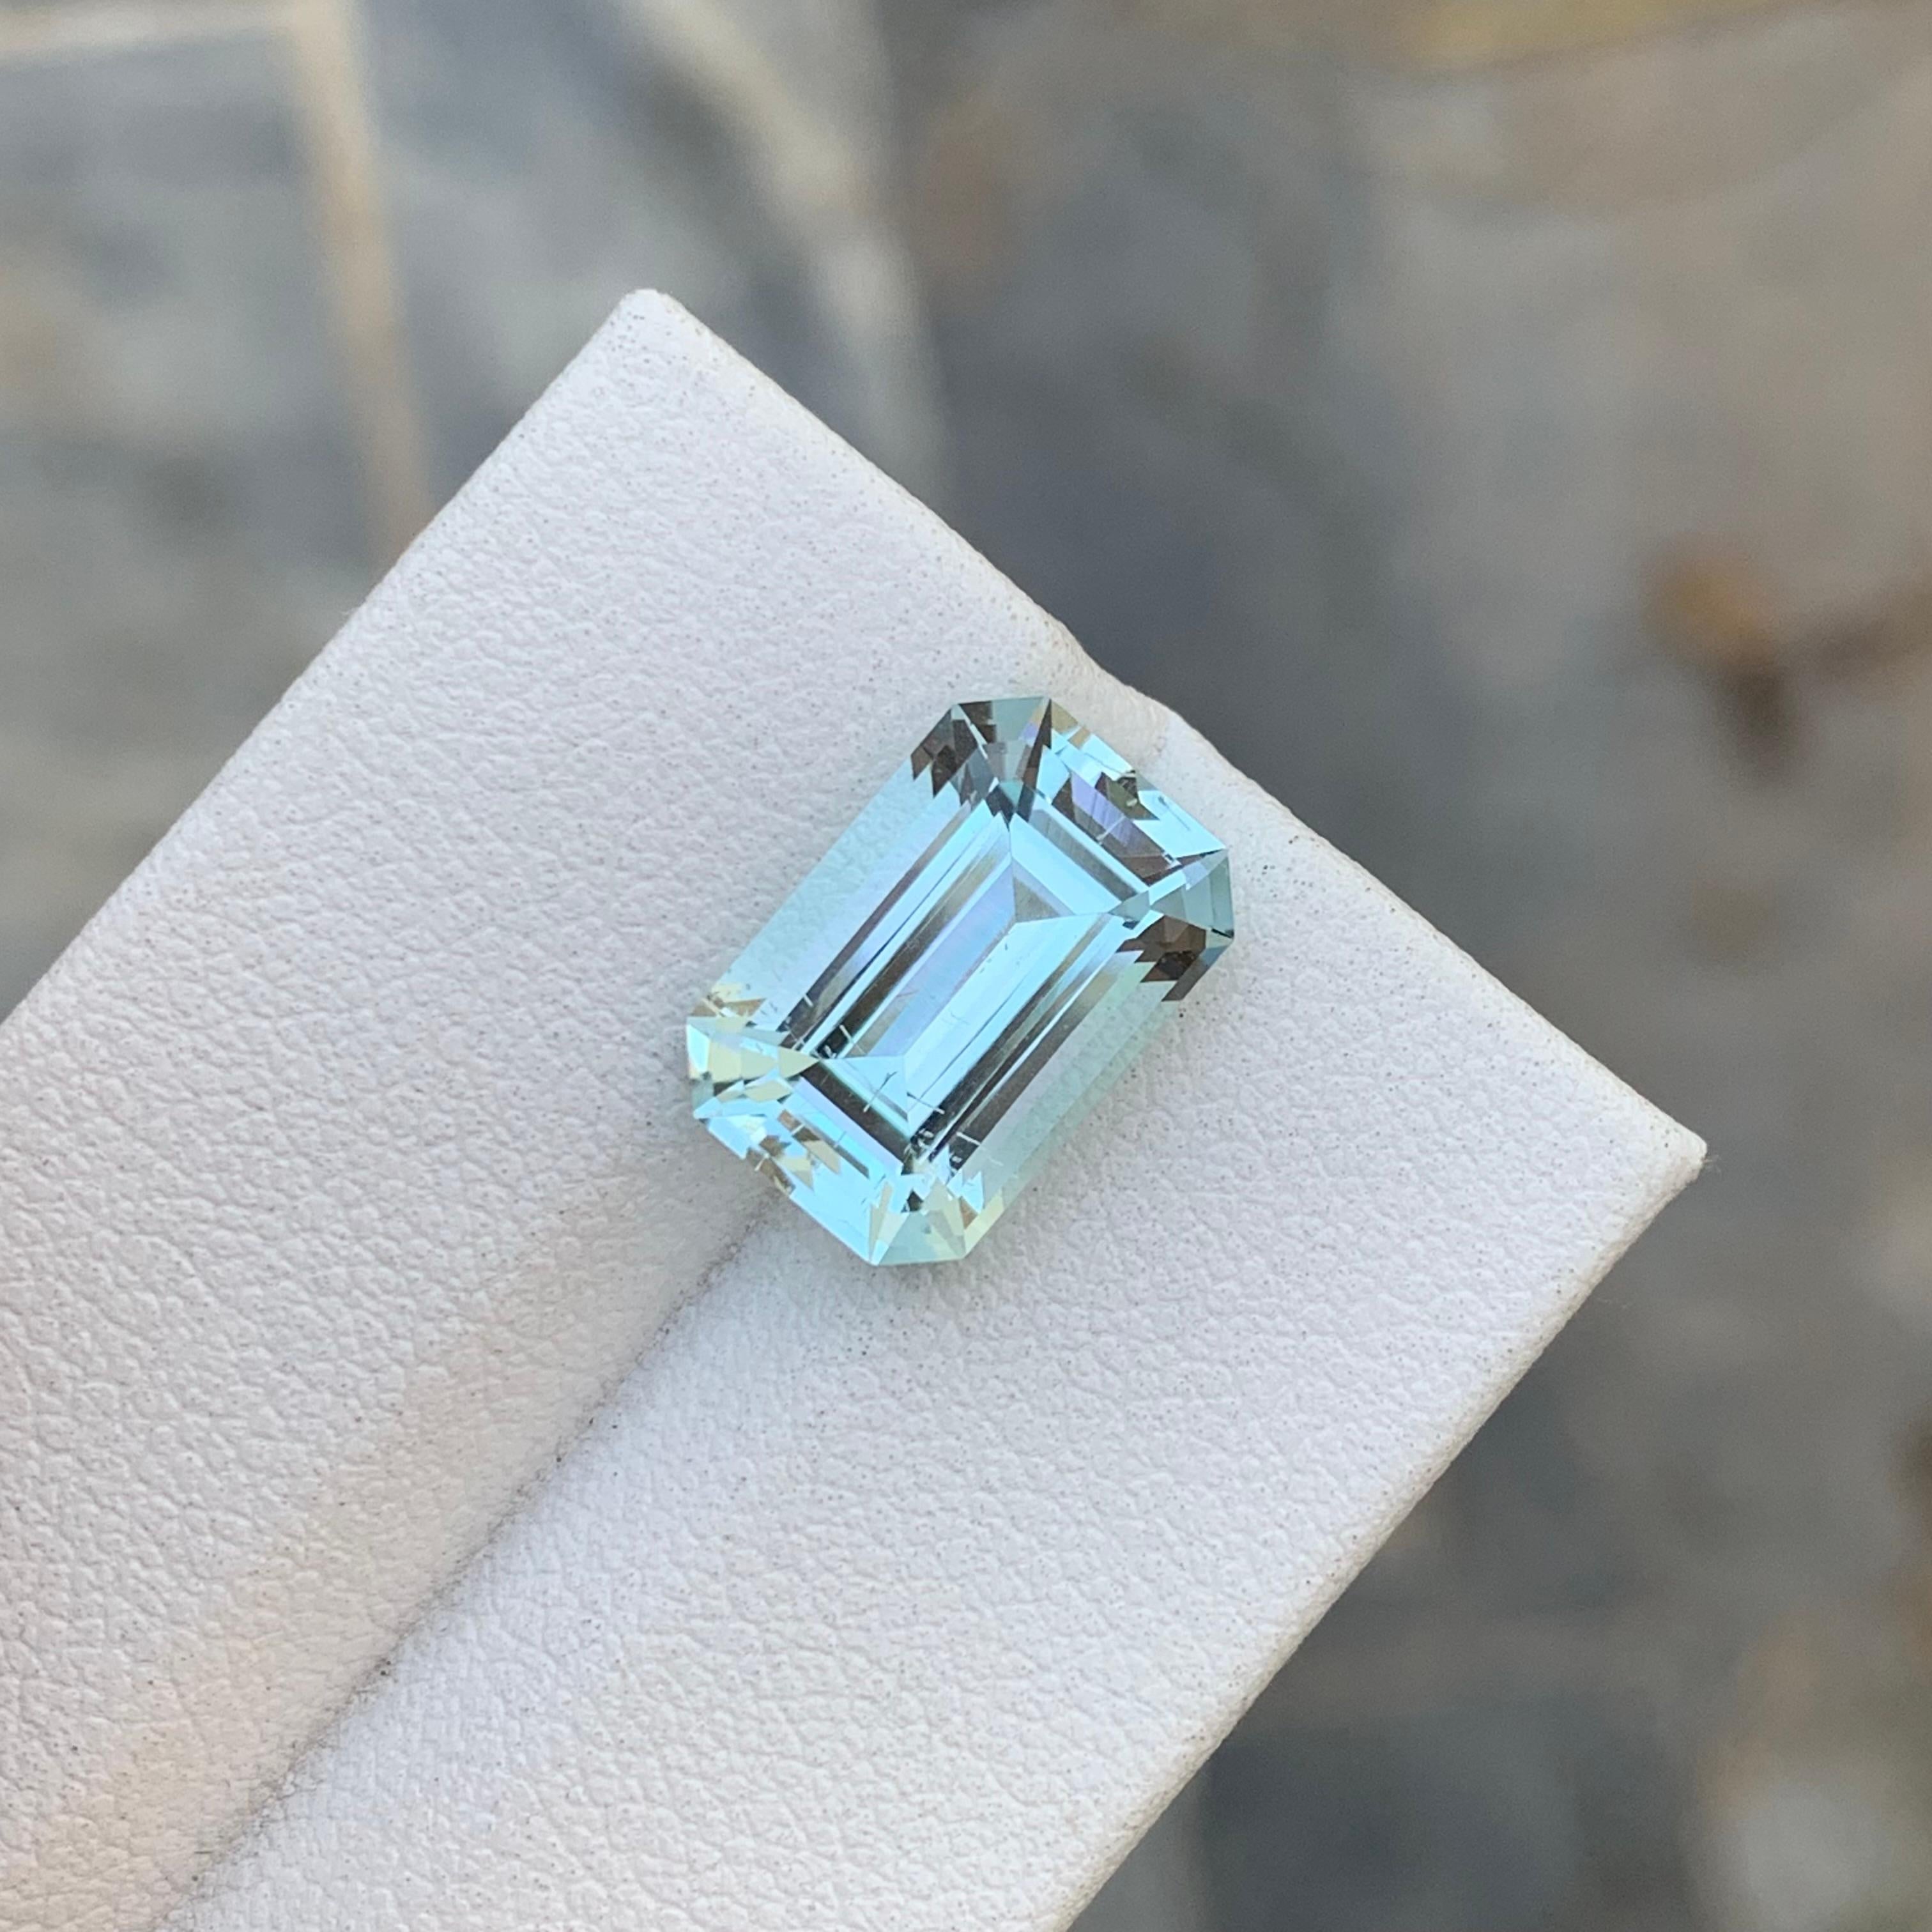 Loose Aquamarine
Weight: 4.70 Carat
Dimension: 12.6 x 8.5 x 6.2 Mm
Colour : Blue and white
Origin: Shigar Valley, Pakistan
Treatment: Non
Certificate : On Demand
Shape: Emerald

Aquamarine is a captivating gemstone known for its enchanting